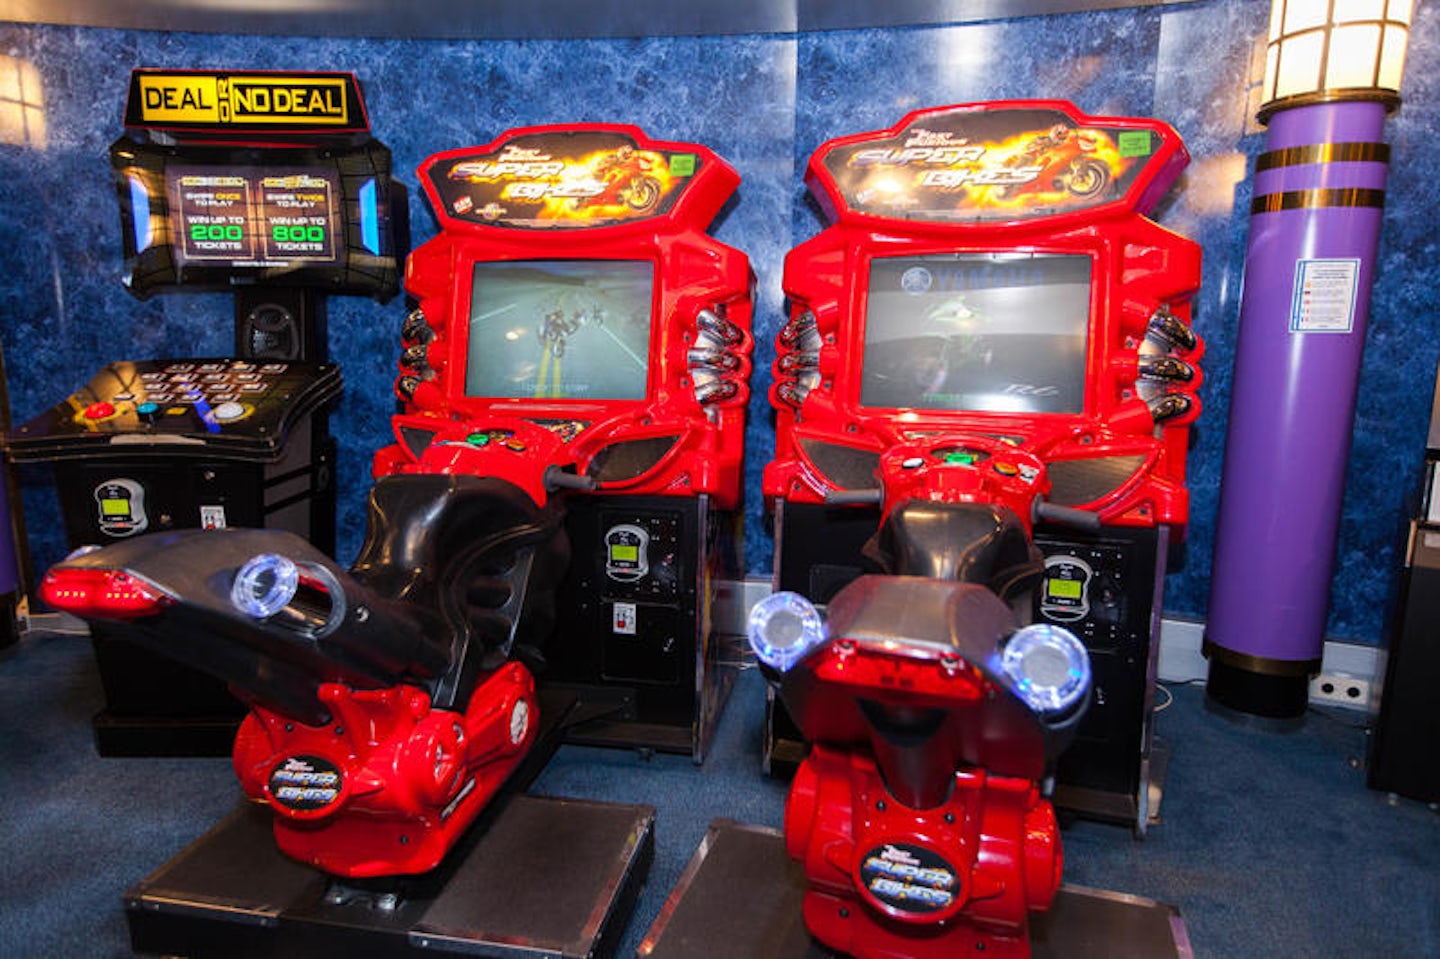 Challenger's Video Arcade on Independence of the Seas